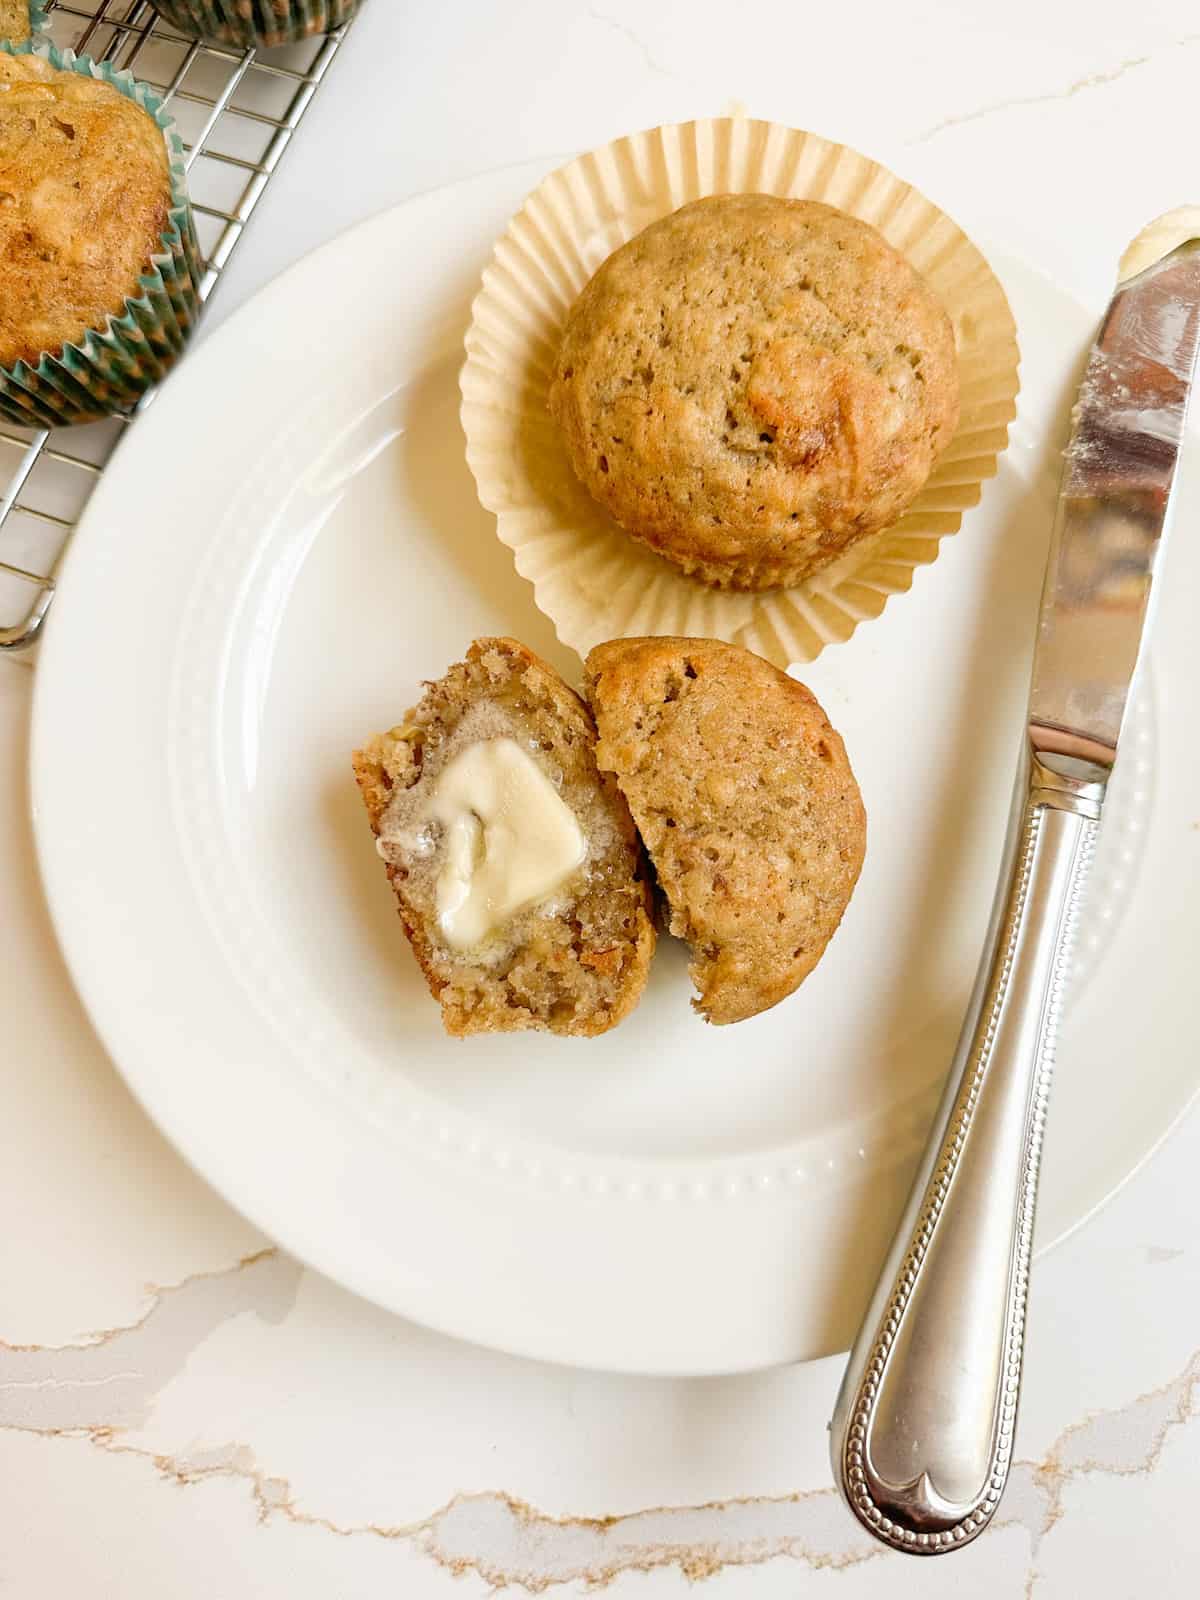 Banana muffins on a plate with a knife and butter.